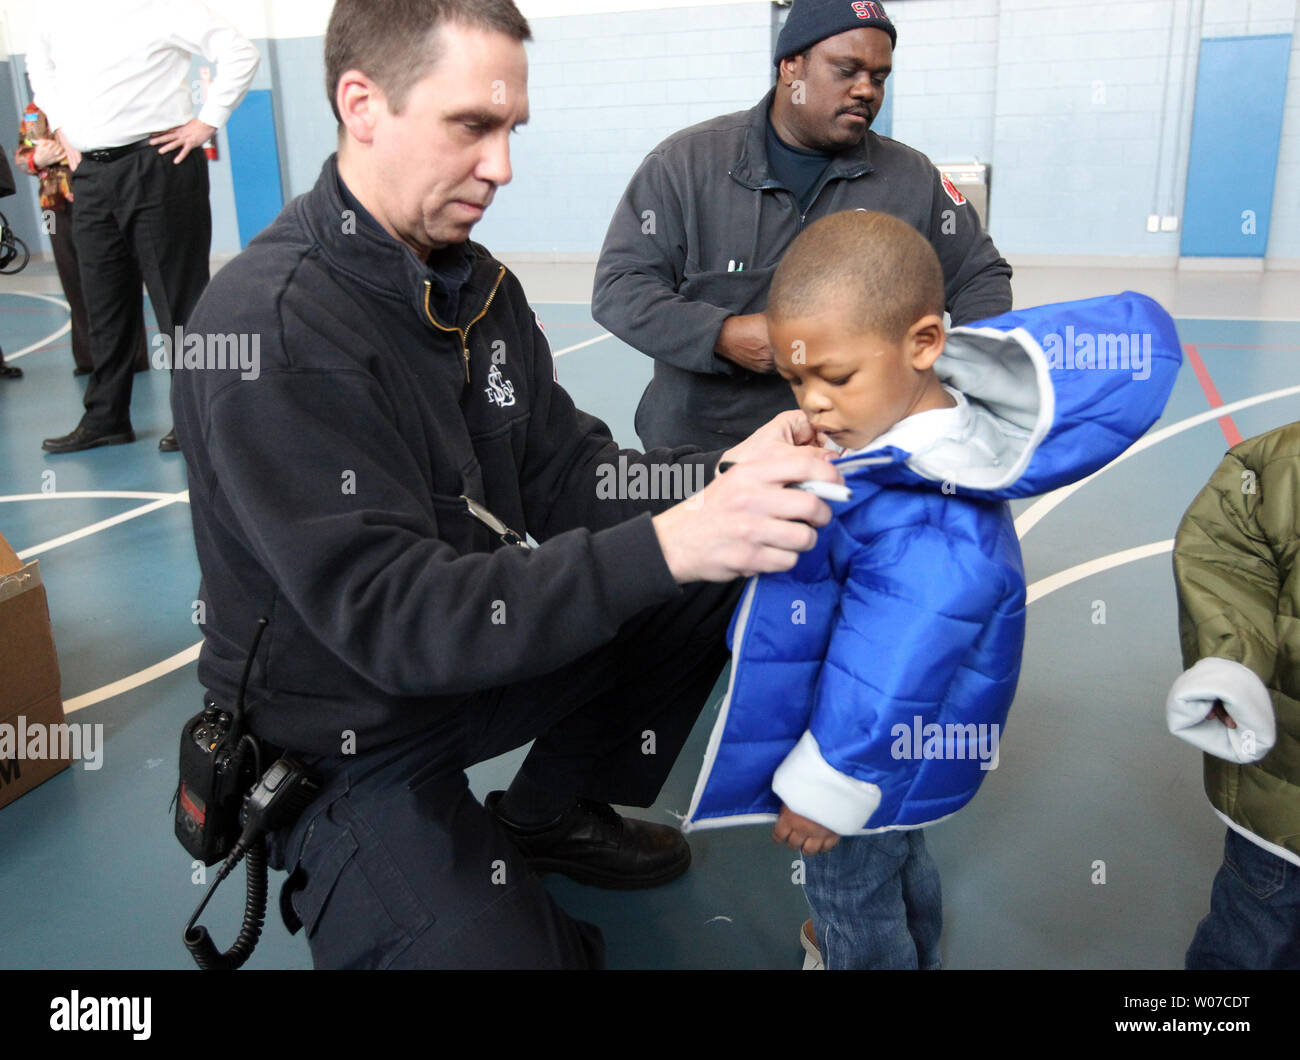 St. Louis Fire Department firefighter Jerald Scheen helps Terrell McFee (2) with his new jacket after receiving the coat at the Kingdom House in St. Louis on February 12, 2014. The Fire Department gave away 102 coats to all of the children at the day care center.  UPI/Bill Greenblatt Stock Photo